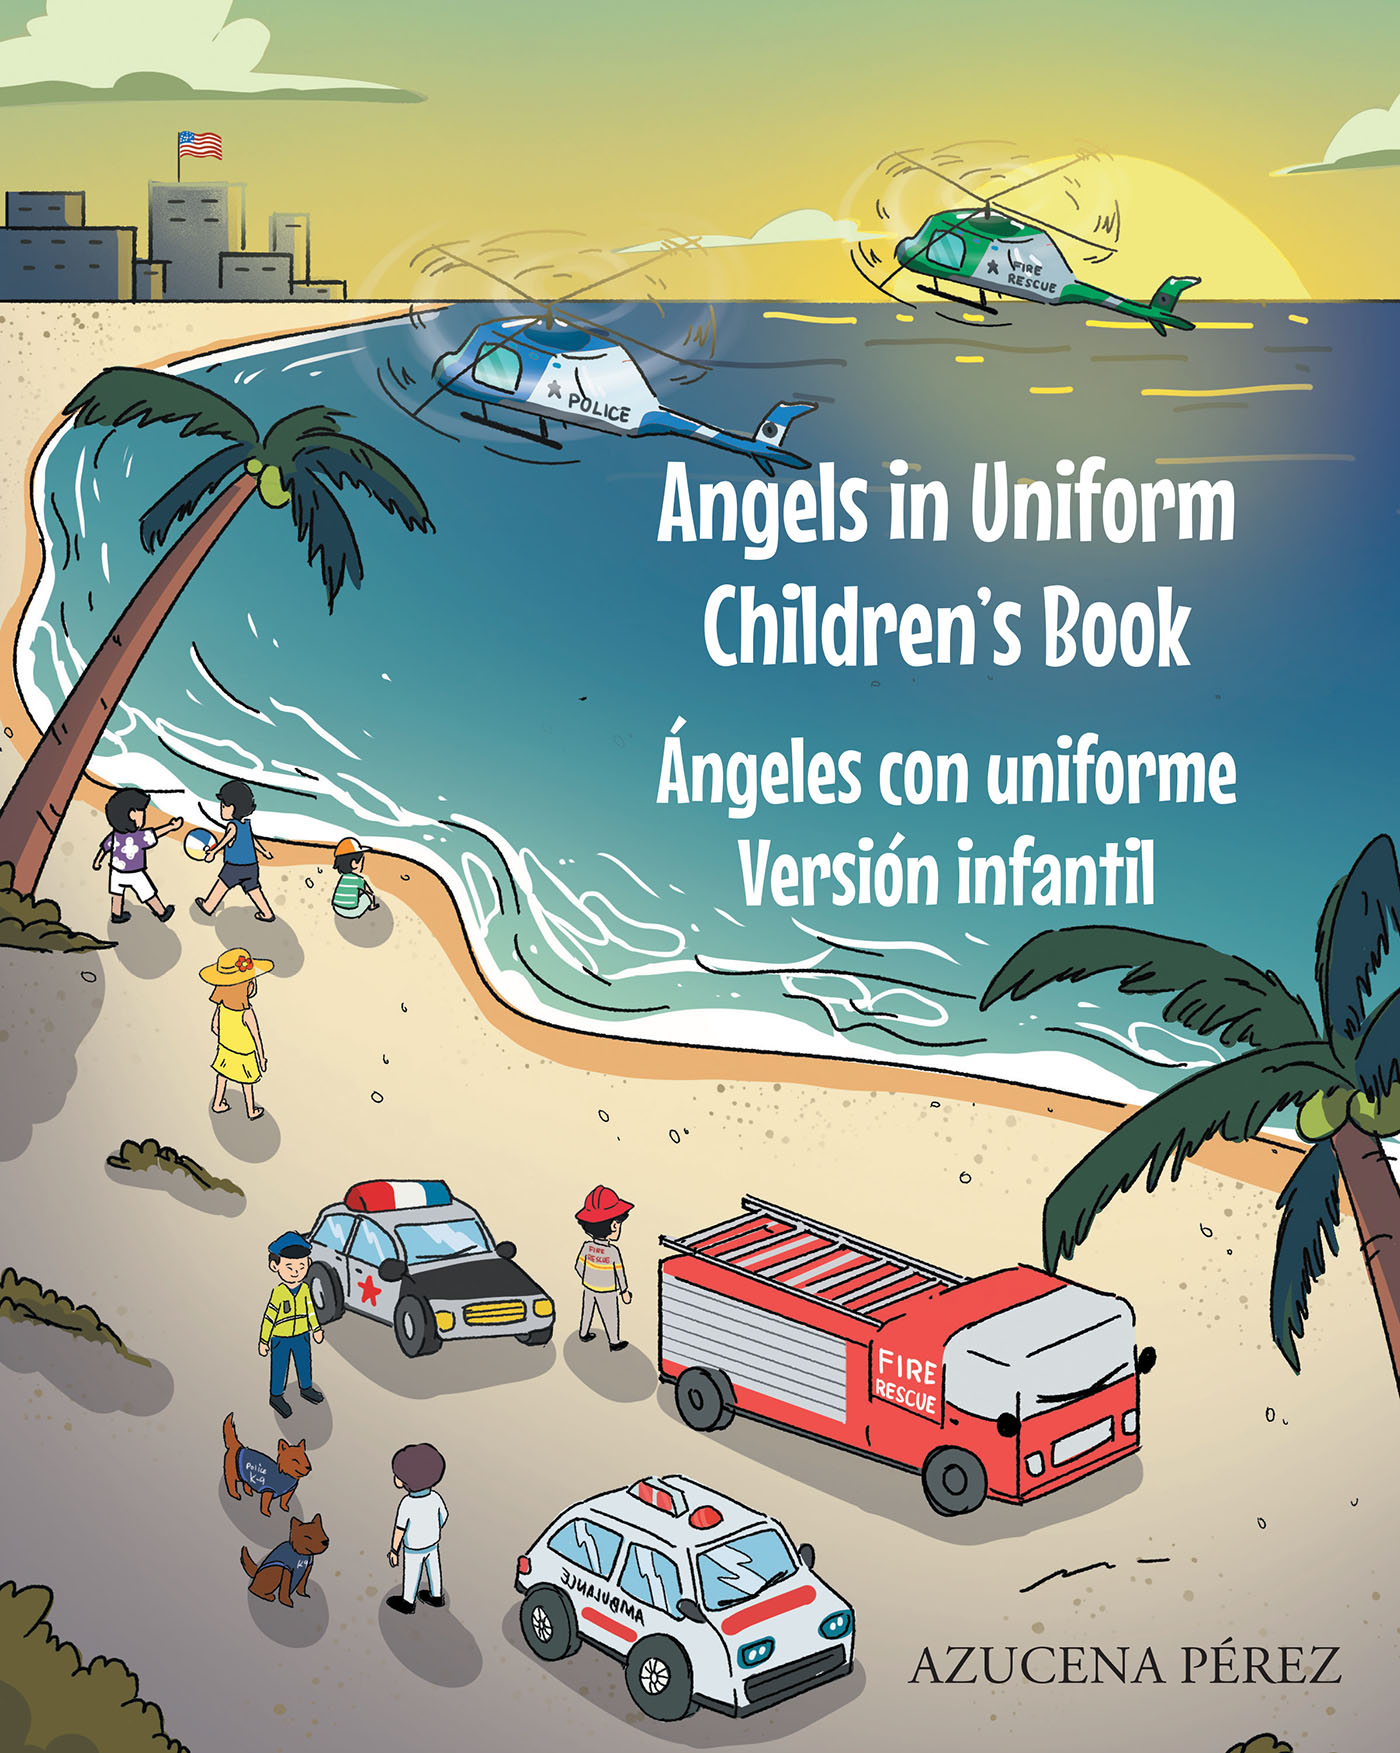 Angels in Uniform Children's book Cover Image